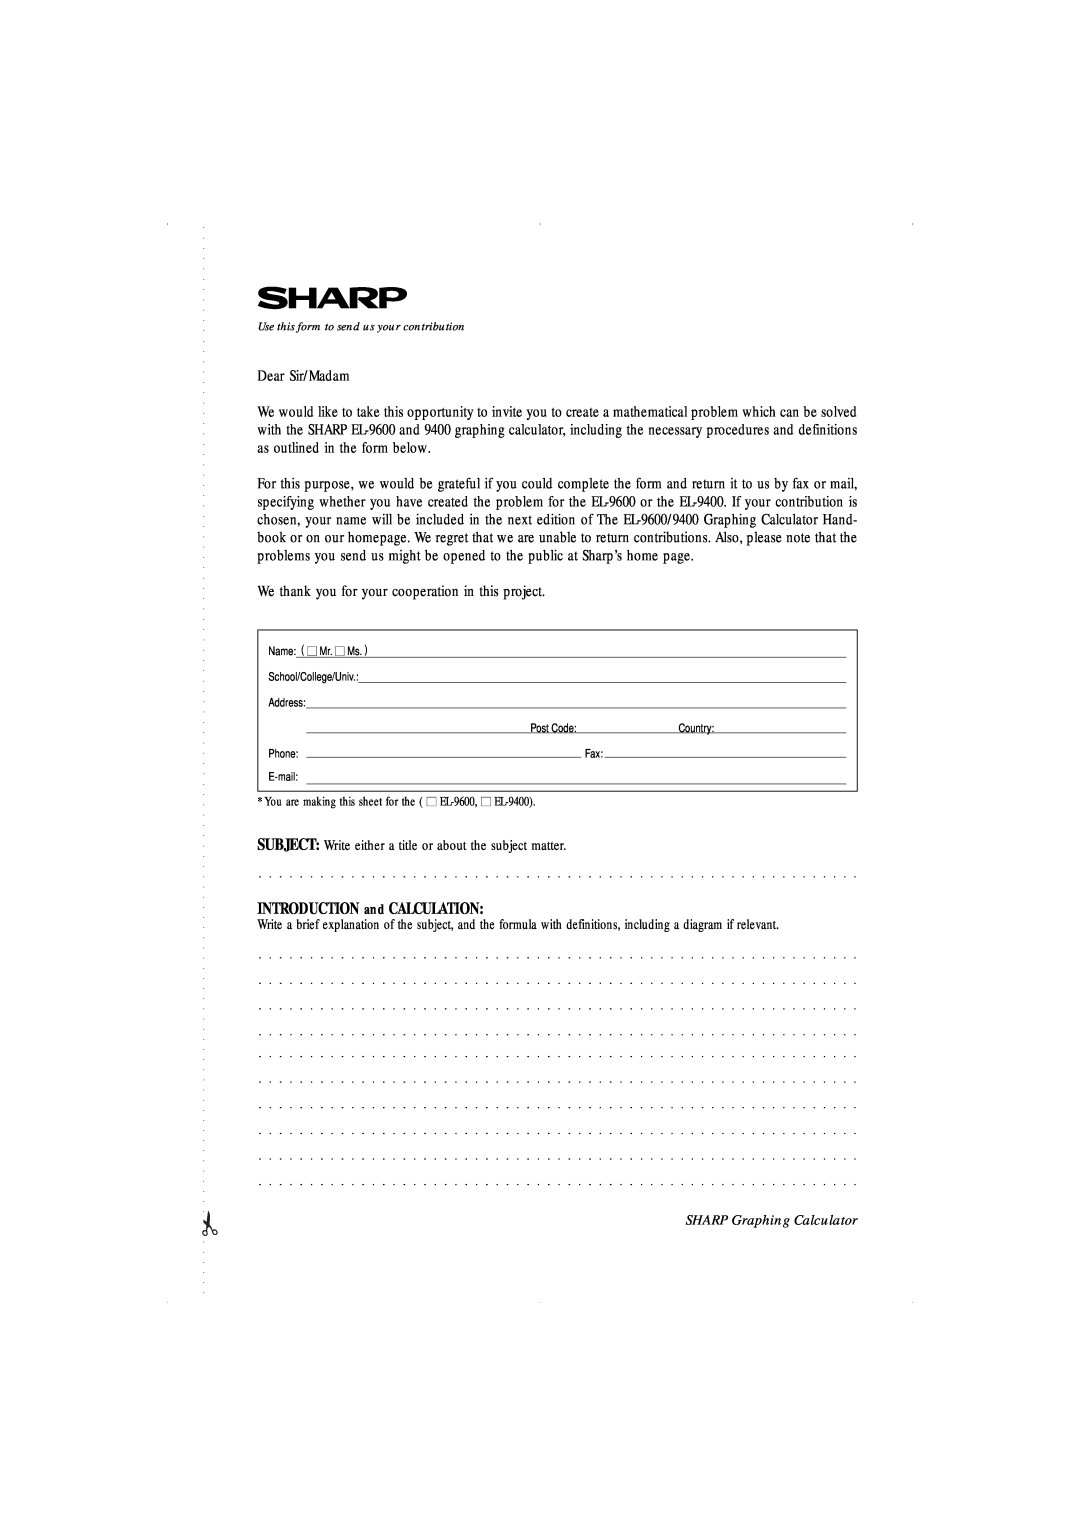 Sharp EL-9400, EL-9600 INTRODUCTION and CALCULATION, Dear Sir/Madam, We thank you for your cooperation in this project 